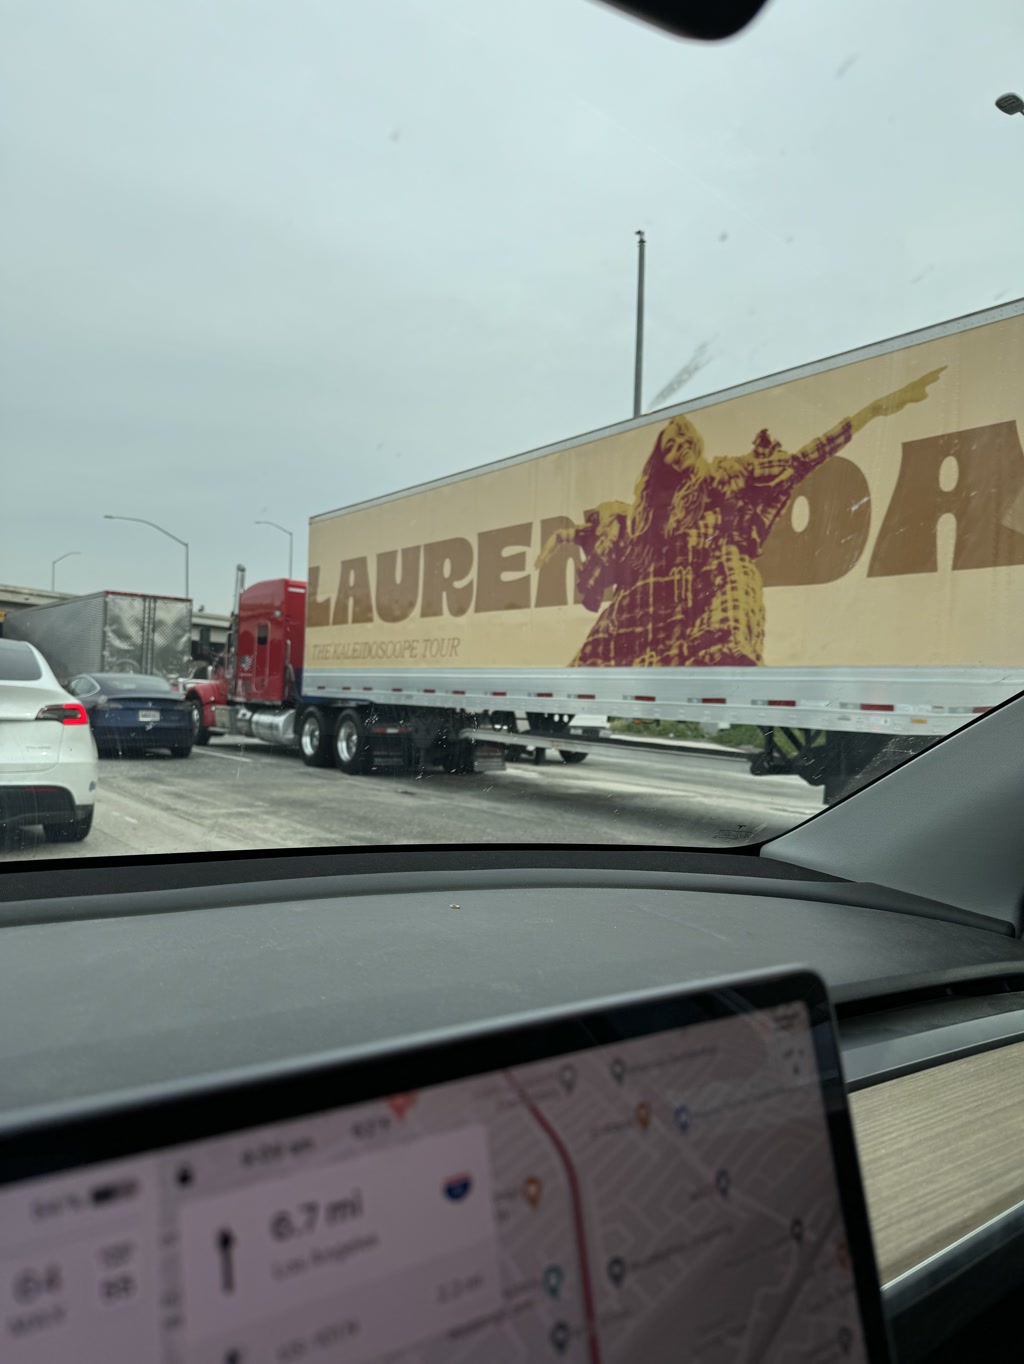 A red semi-truck is pulling a large trailer with a graphic and text printed on its side, featuring a human figure in a dynamic pose with one arm stretched out. The background has a warm tone, suggesting a psychedelic design. Behind the truck, there are other vehicles on the road, indicating a highway or busy street setting. The view is from inside a vehicle with part of the dashboard visible, including a navigation screen that displays a map and some driving metrics.